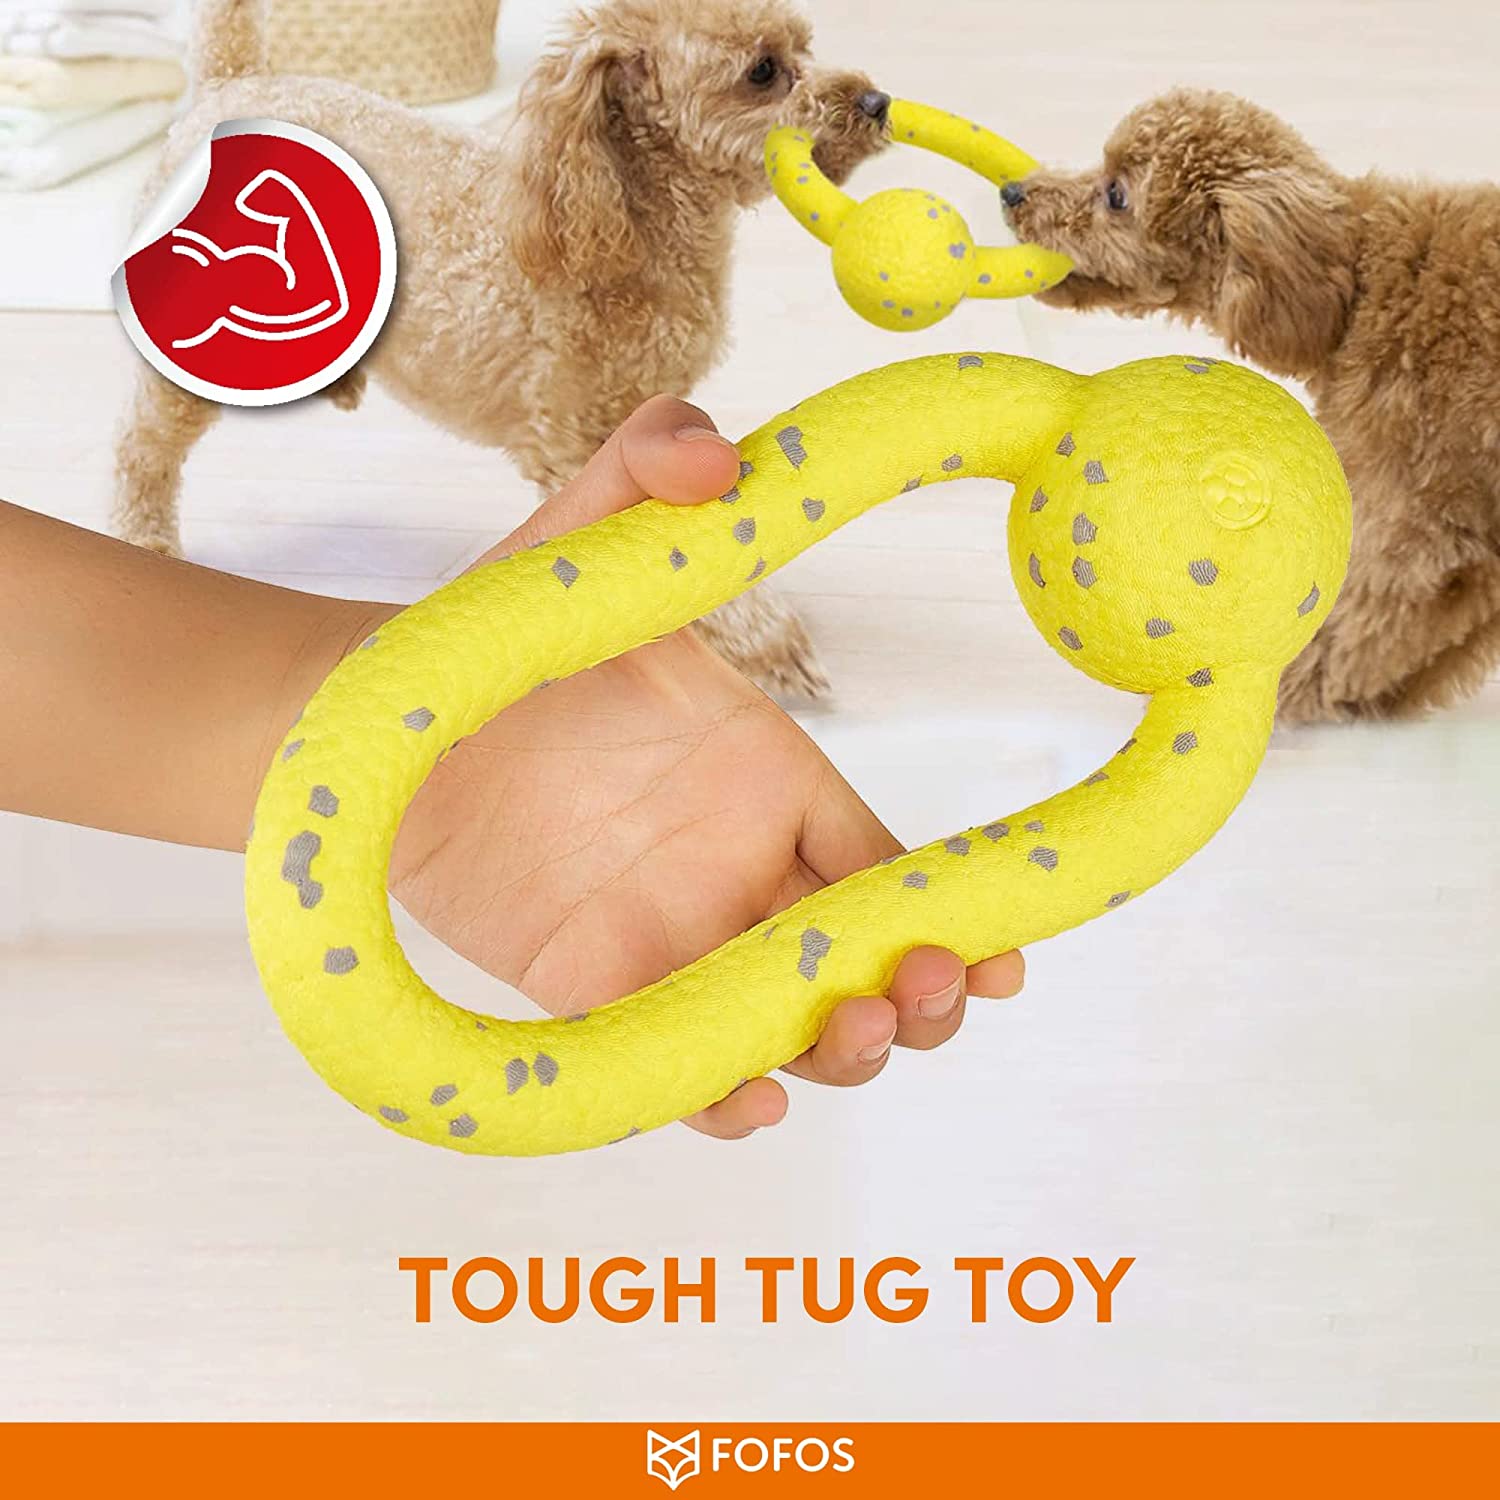 FOFOS Durable Puller Dog Toy – Dog Chew Toy